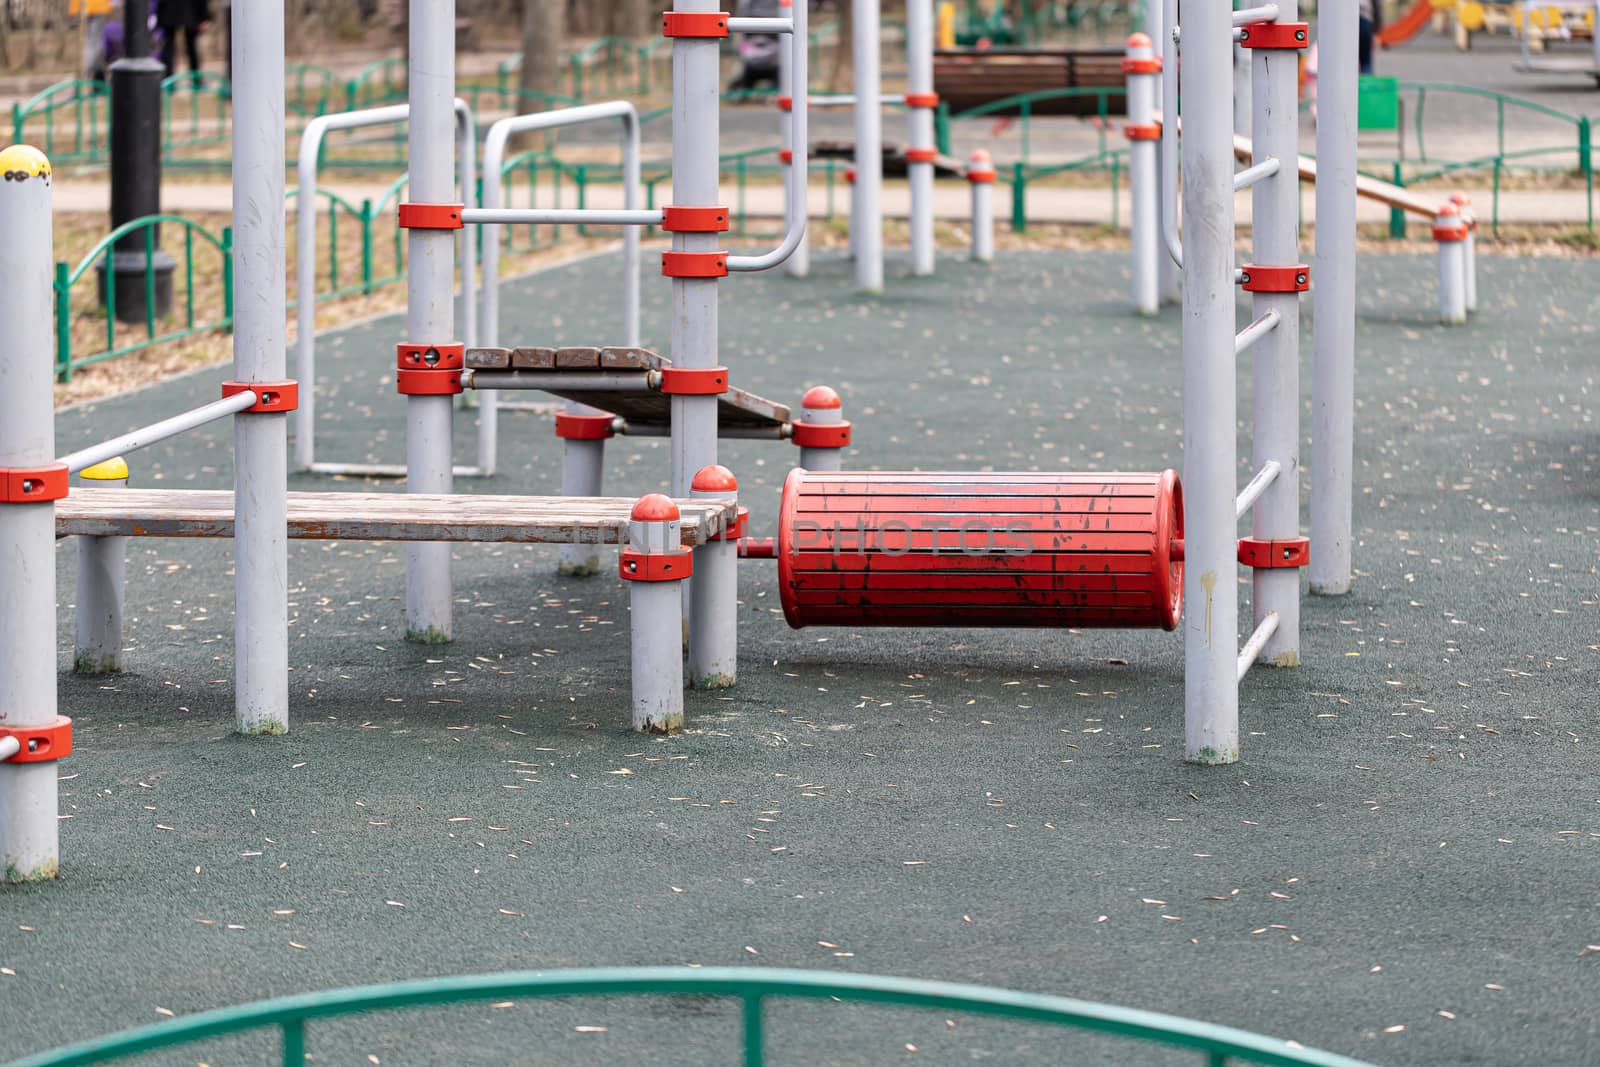 An empty modern Playground with climbing ladders on a bright Sunny spring day. An ideal place for children's outdoor activities.